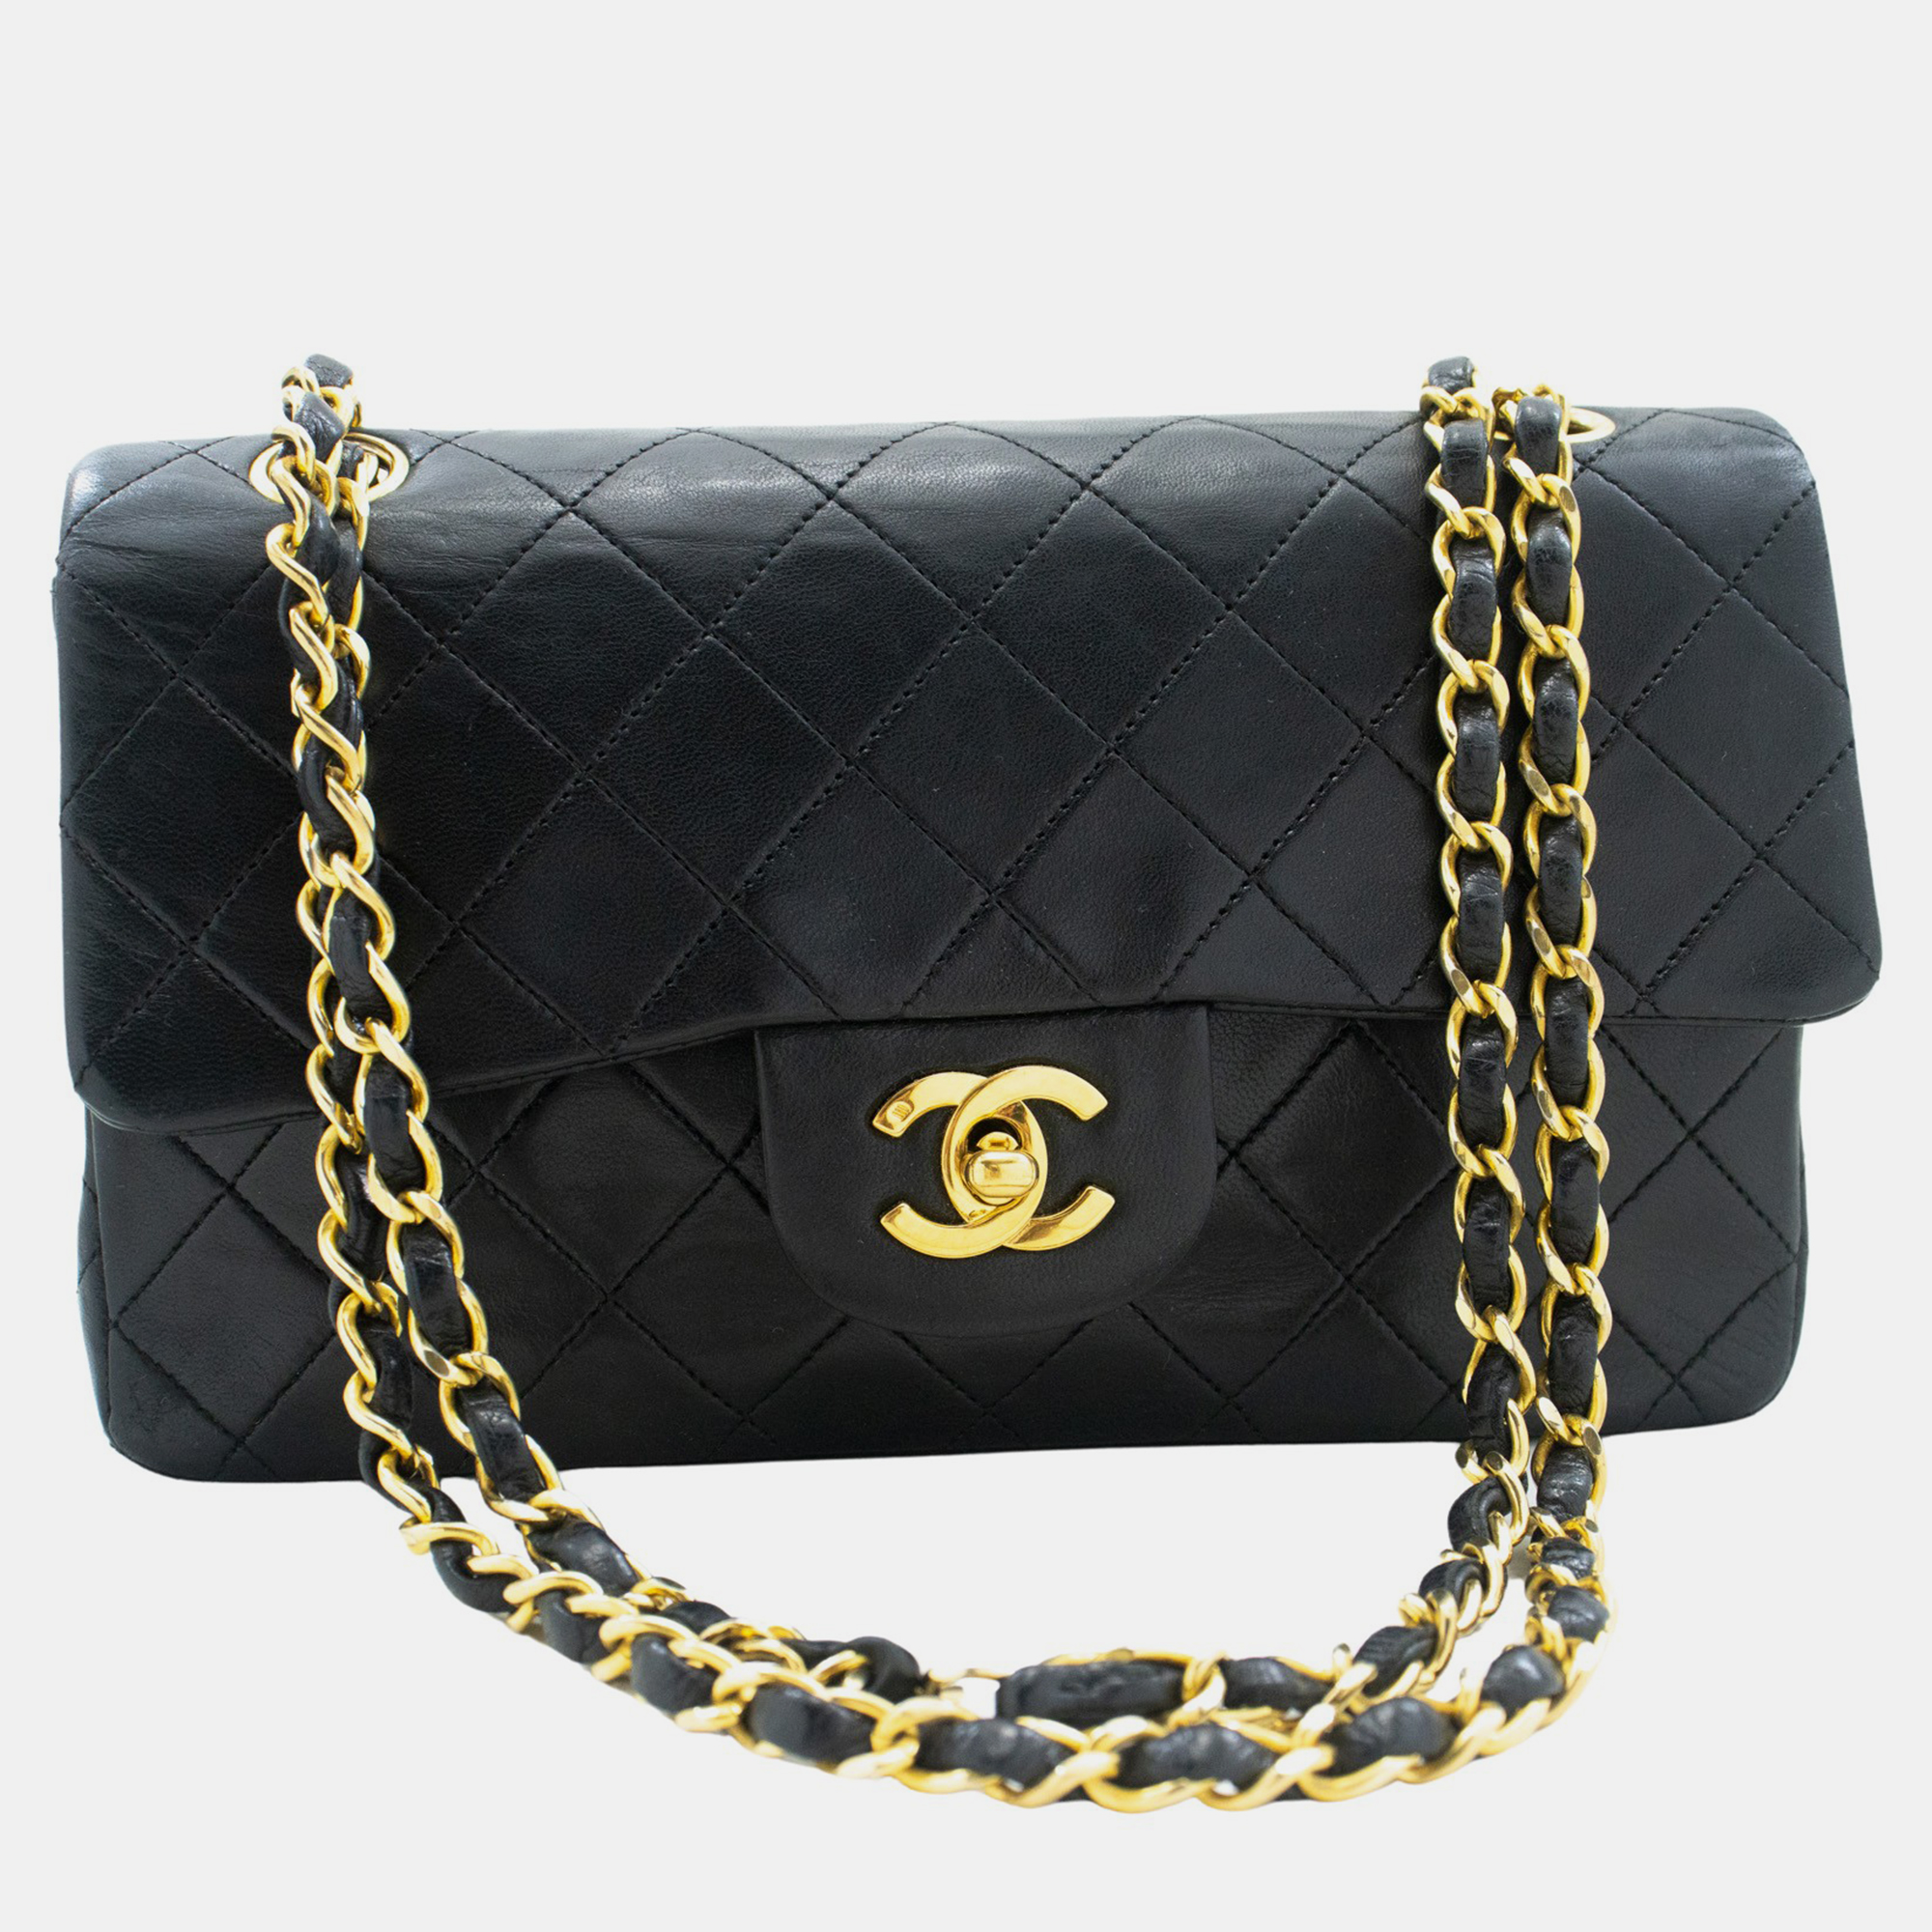 Chanel black leather classic double flap bag